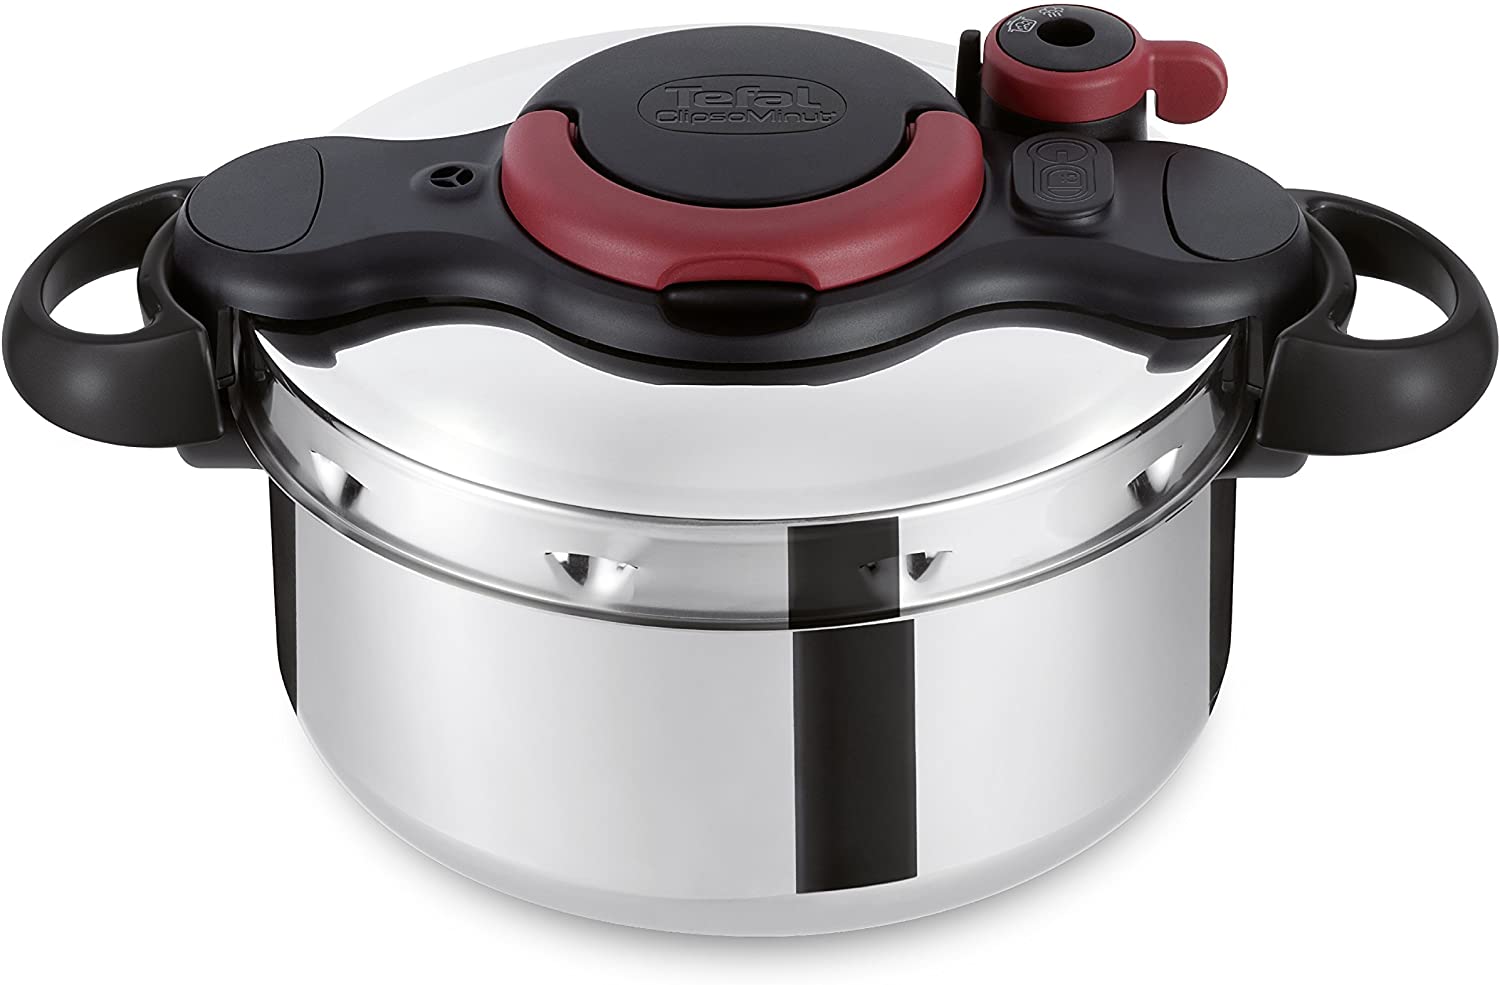 Tefal Clipso Minut Easy 22 cm Stainless Steel Pressure Cooker, Multi-Colour